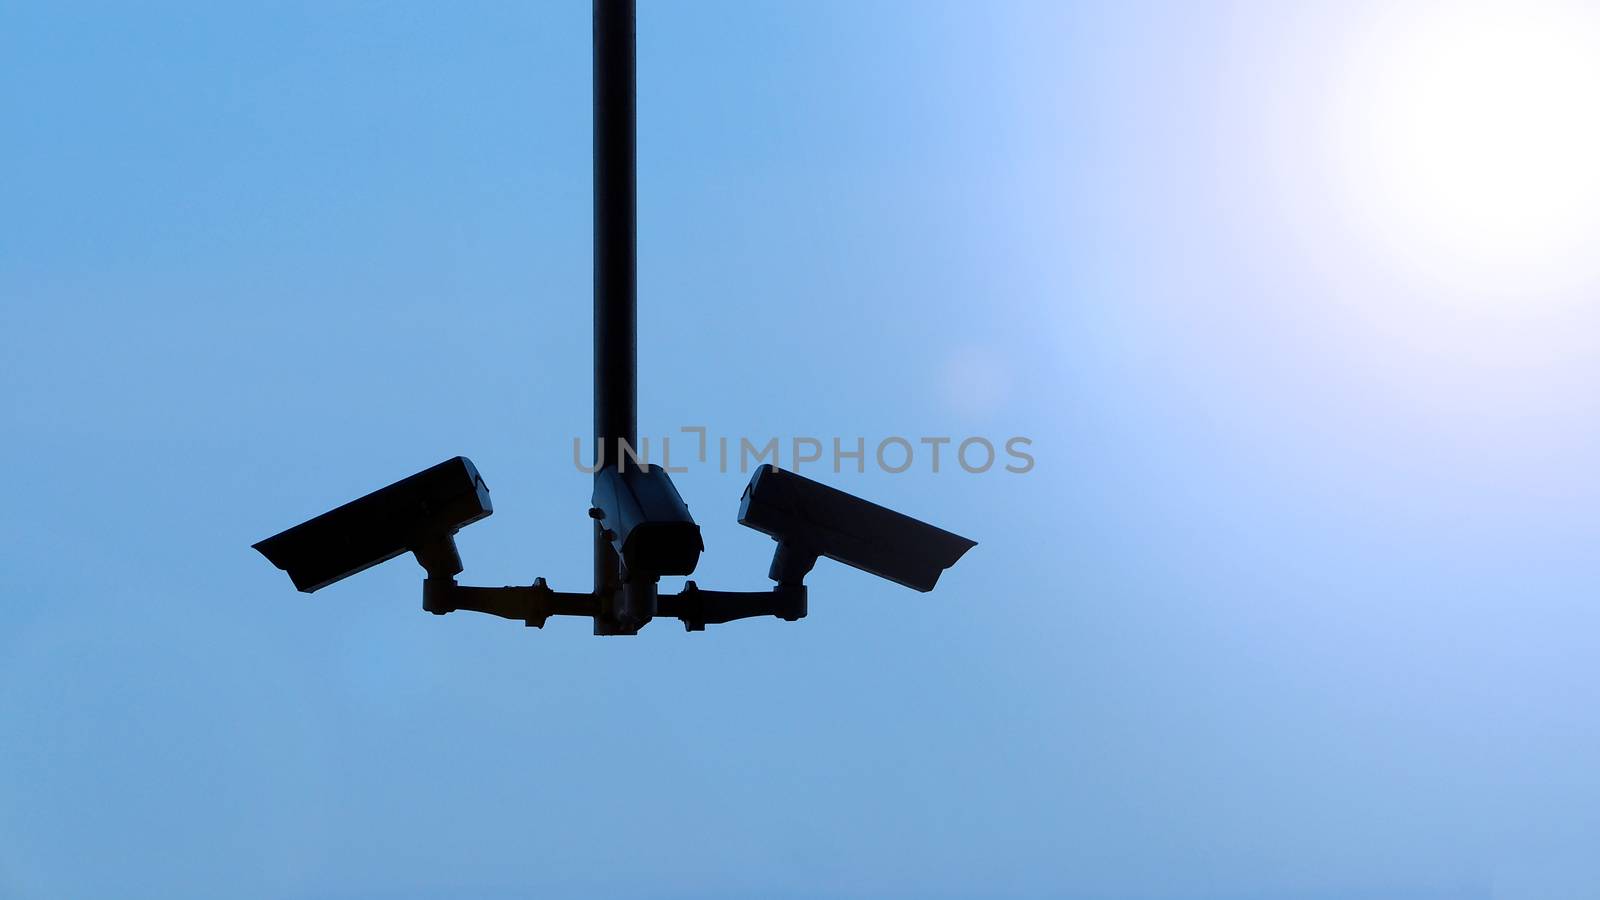 Silhoutte images of security camera or cctv video surveilance at outdoor which is technology system for spy or observe people or building that need protection guard or privacy area.